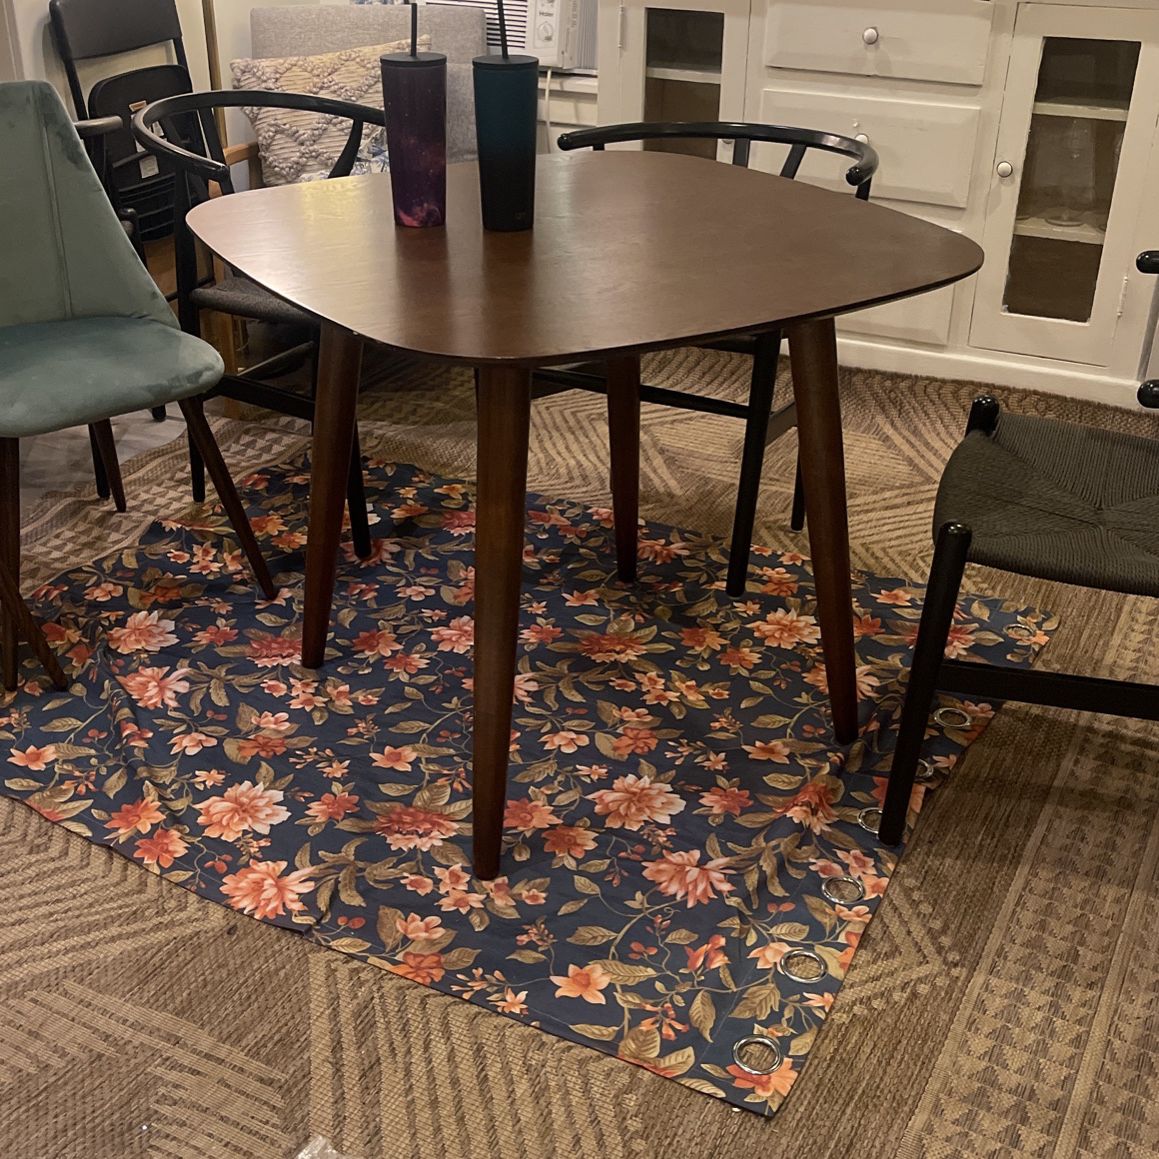 36”x36” Midcentury Modern Dining Table 